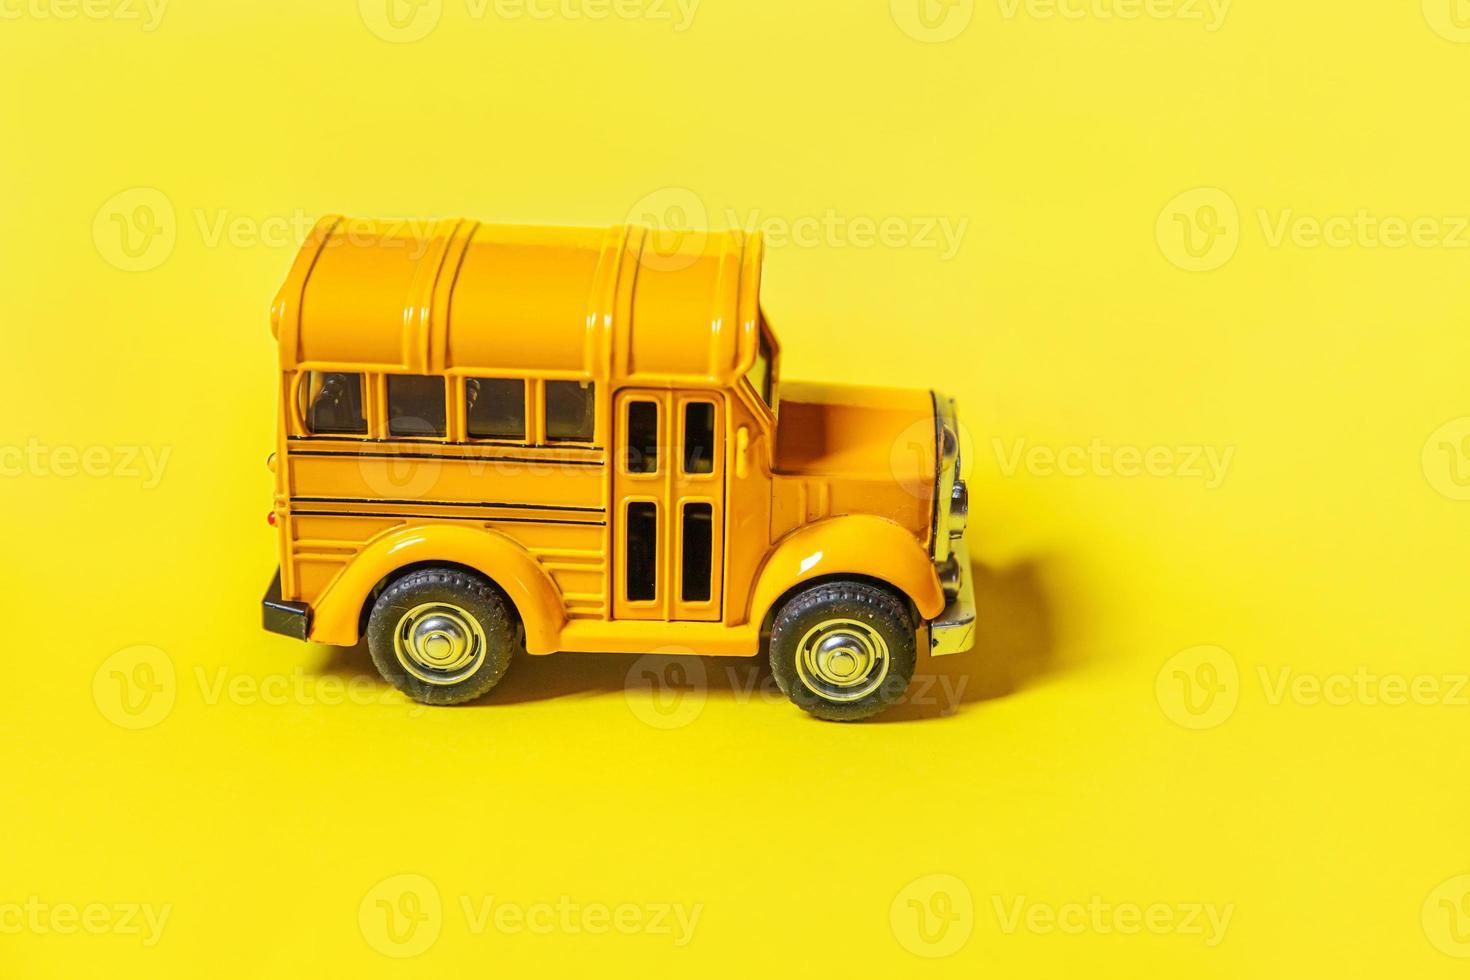 Simply design yellow classic toy car school bus isolated on yellow colorful background. Safety daily transport for kids. Back to school concept. Education symbol, copy space photo